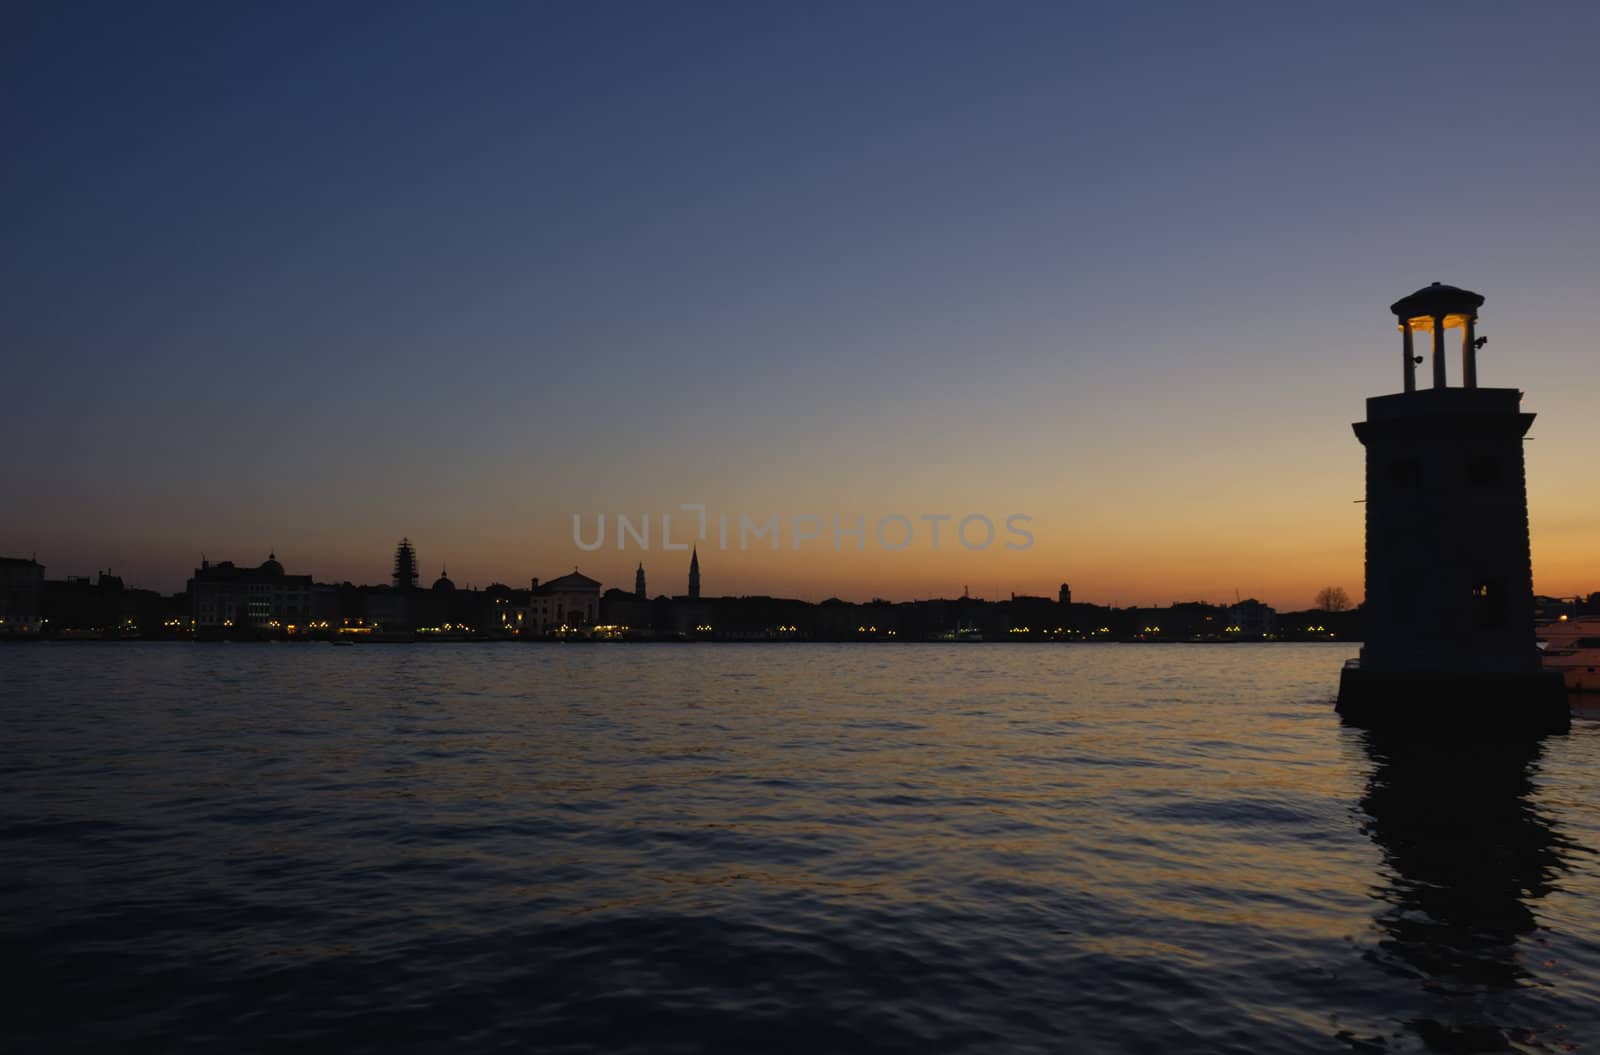 Looking across the lagoon at Venice from the island of St Georgio, at dawn